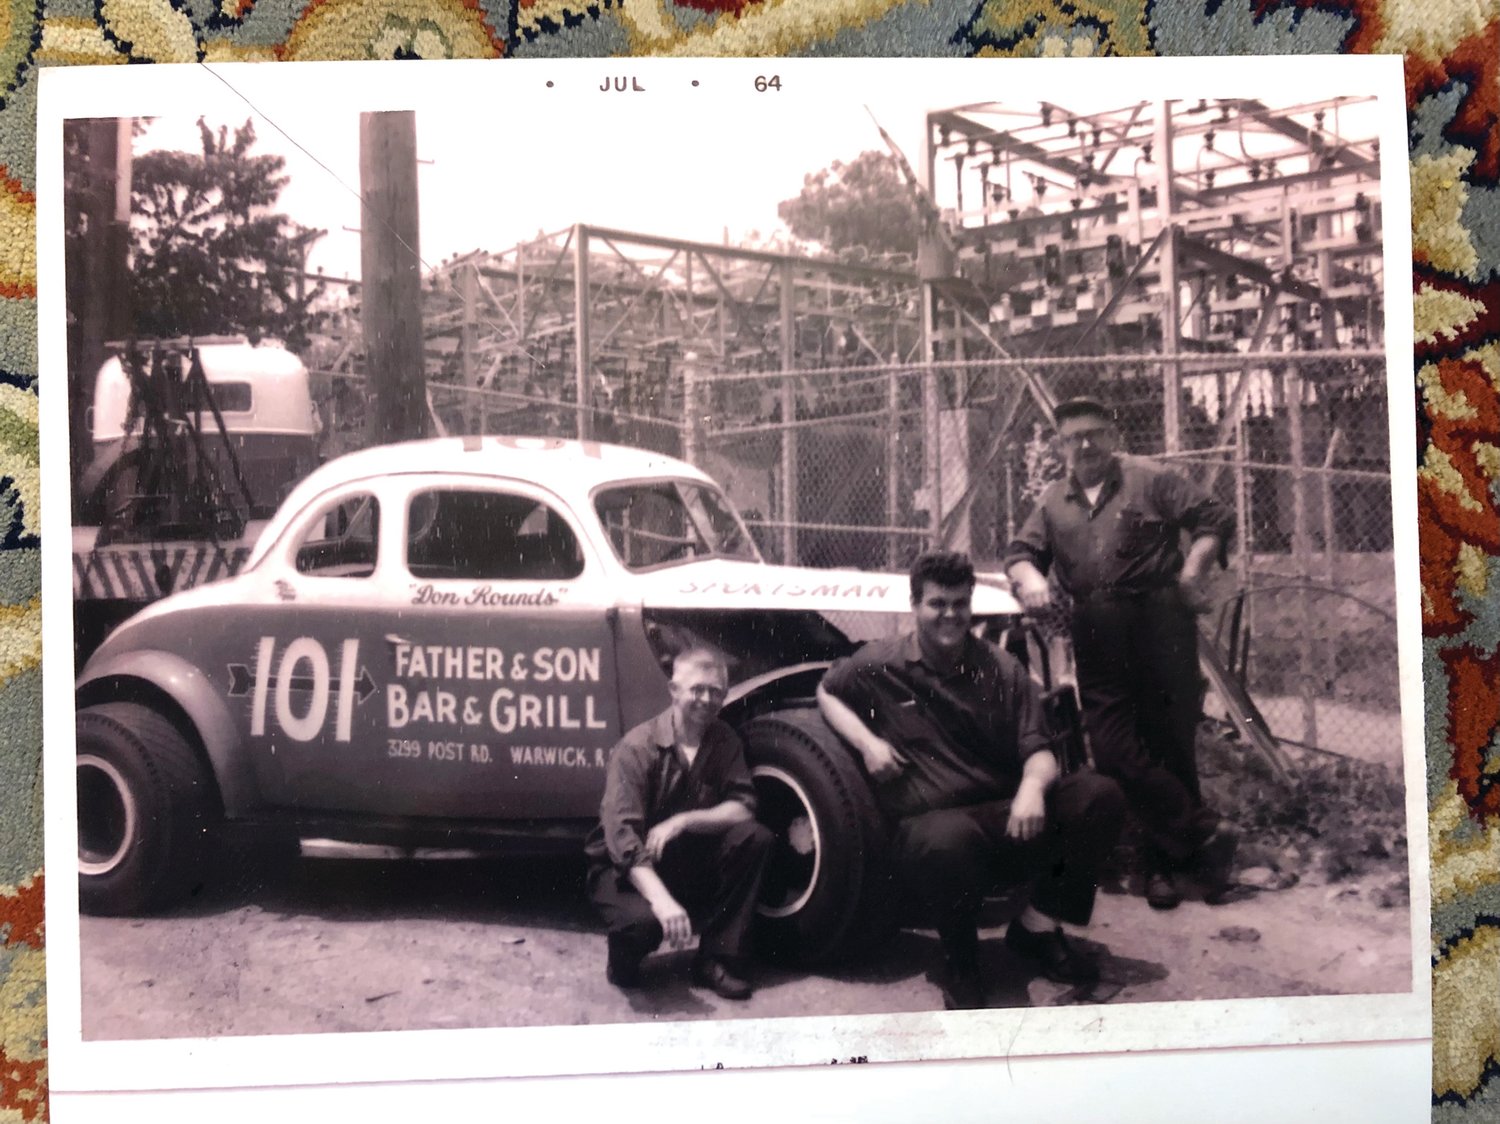 Harold Rounds, family friend “Big Wayne” Voelker, and Lewis Rounds with the historic 101 at the Apponaug Garage on Post Road.